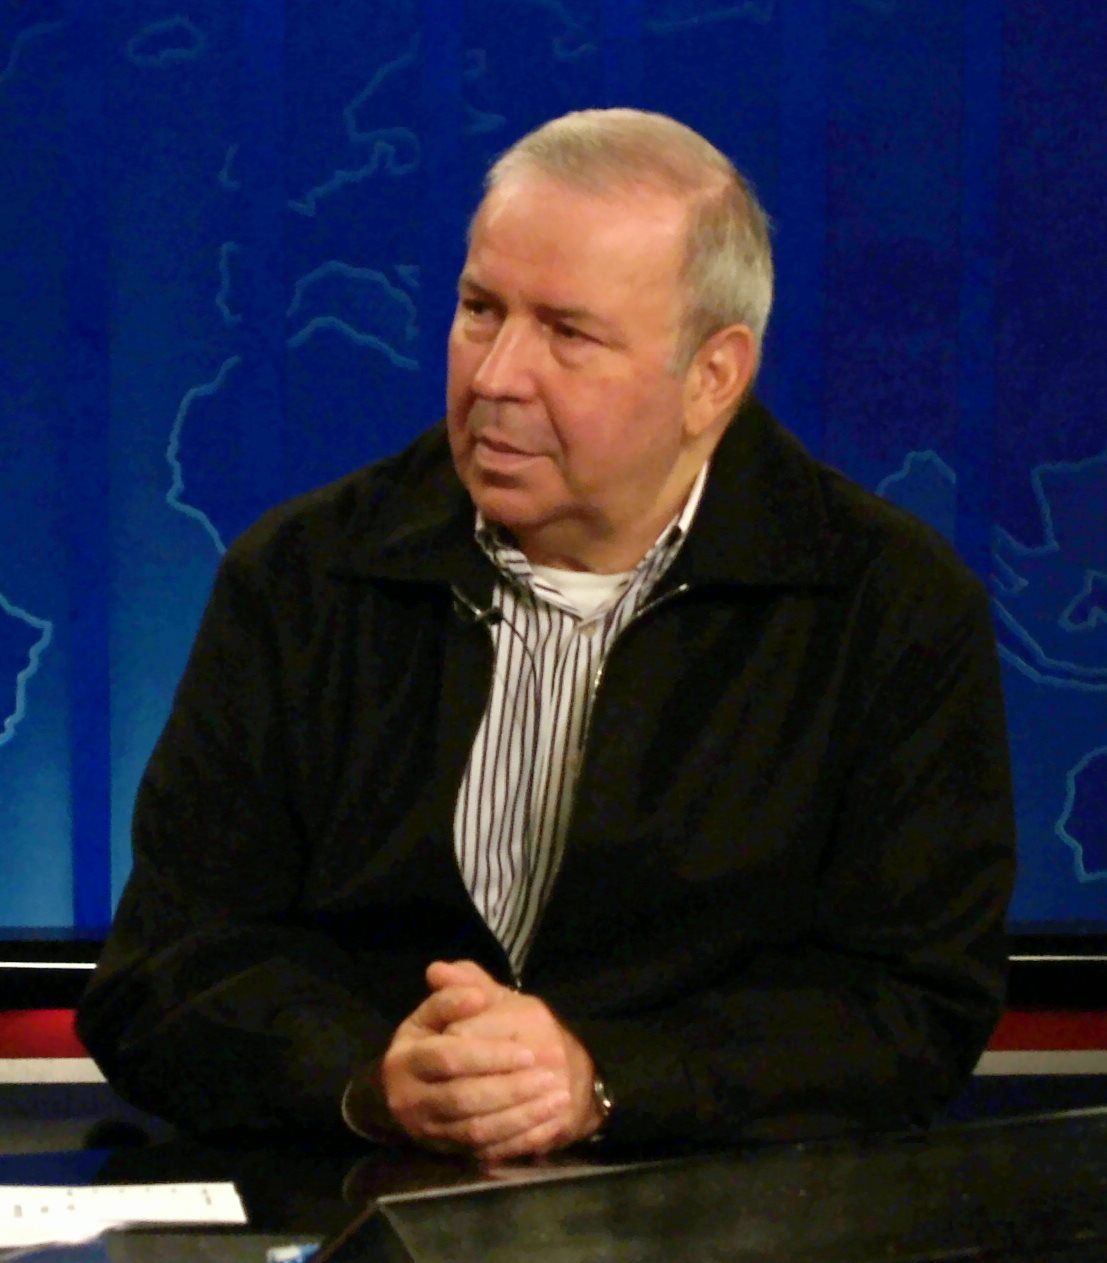 Frank Sinatra Jr. Dies At 72 While On Tour